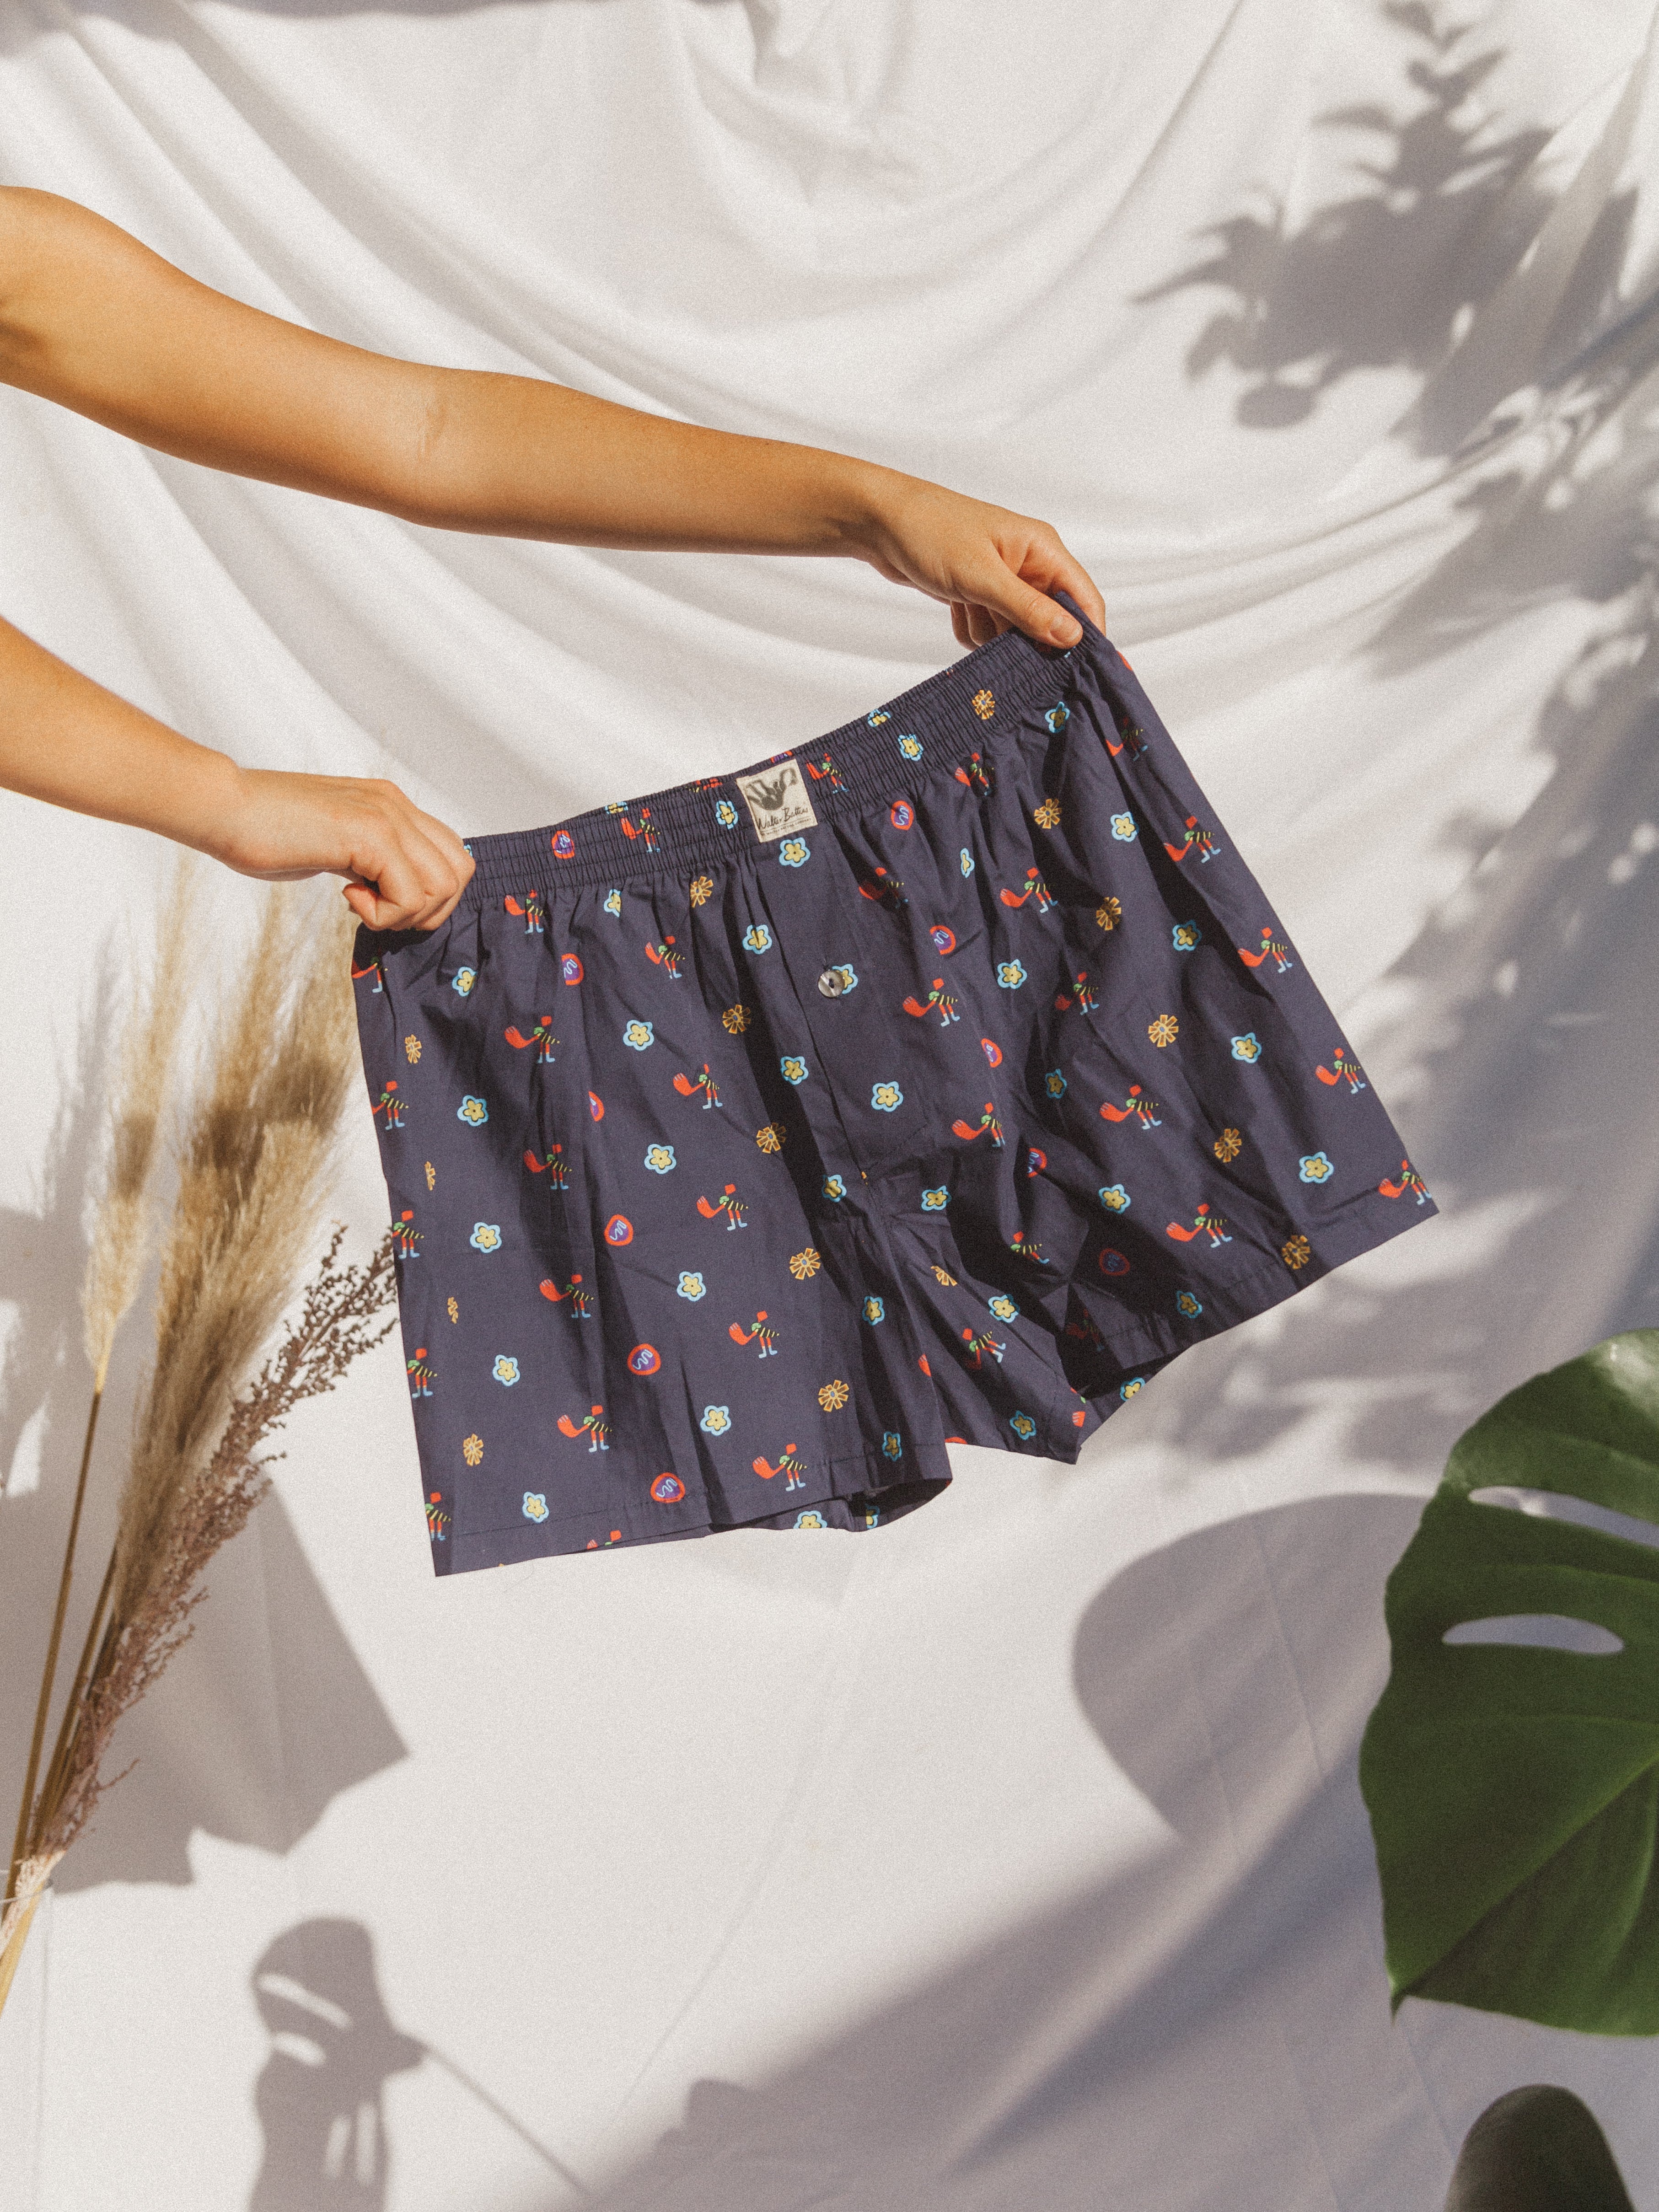 The ‘Busy-Bee’ Boxer Shorts